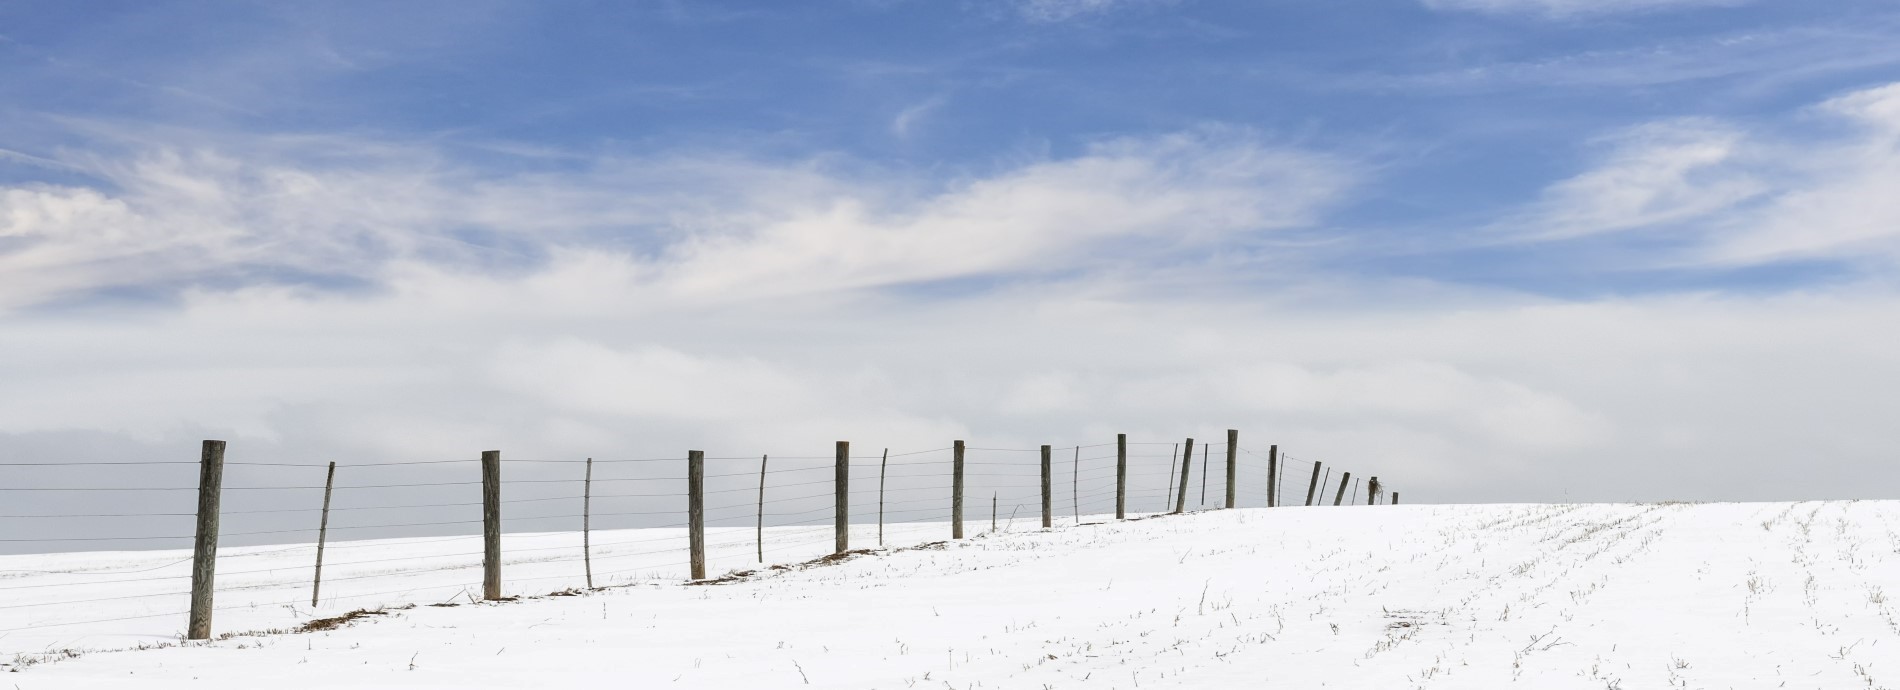 fence line in winter